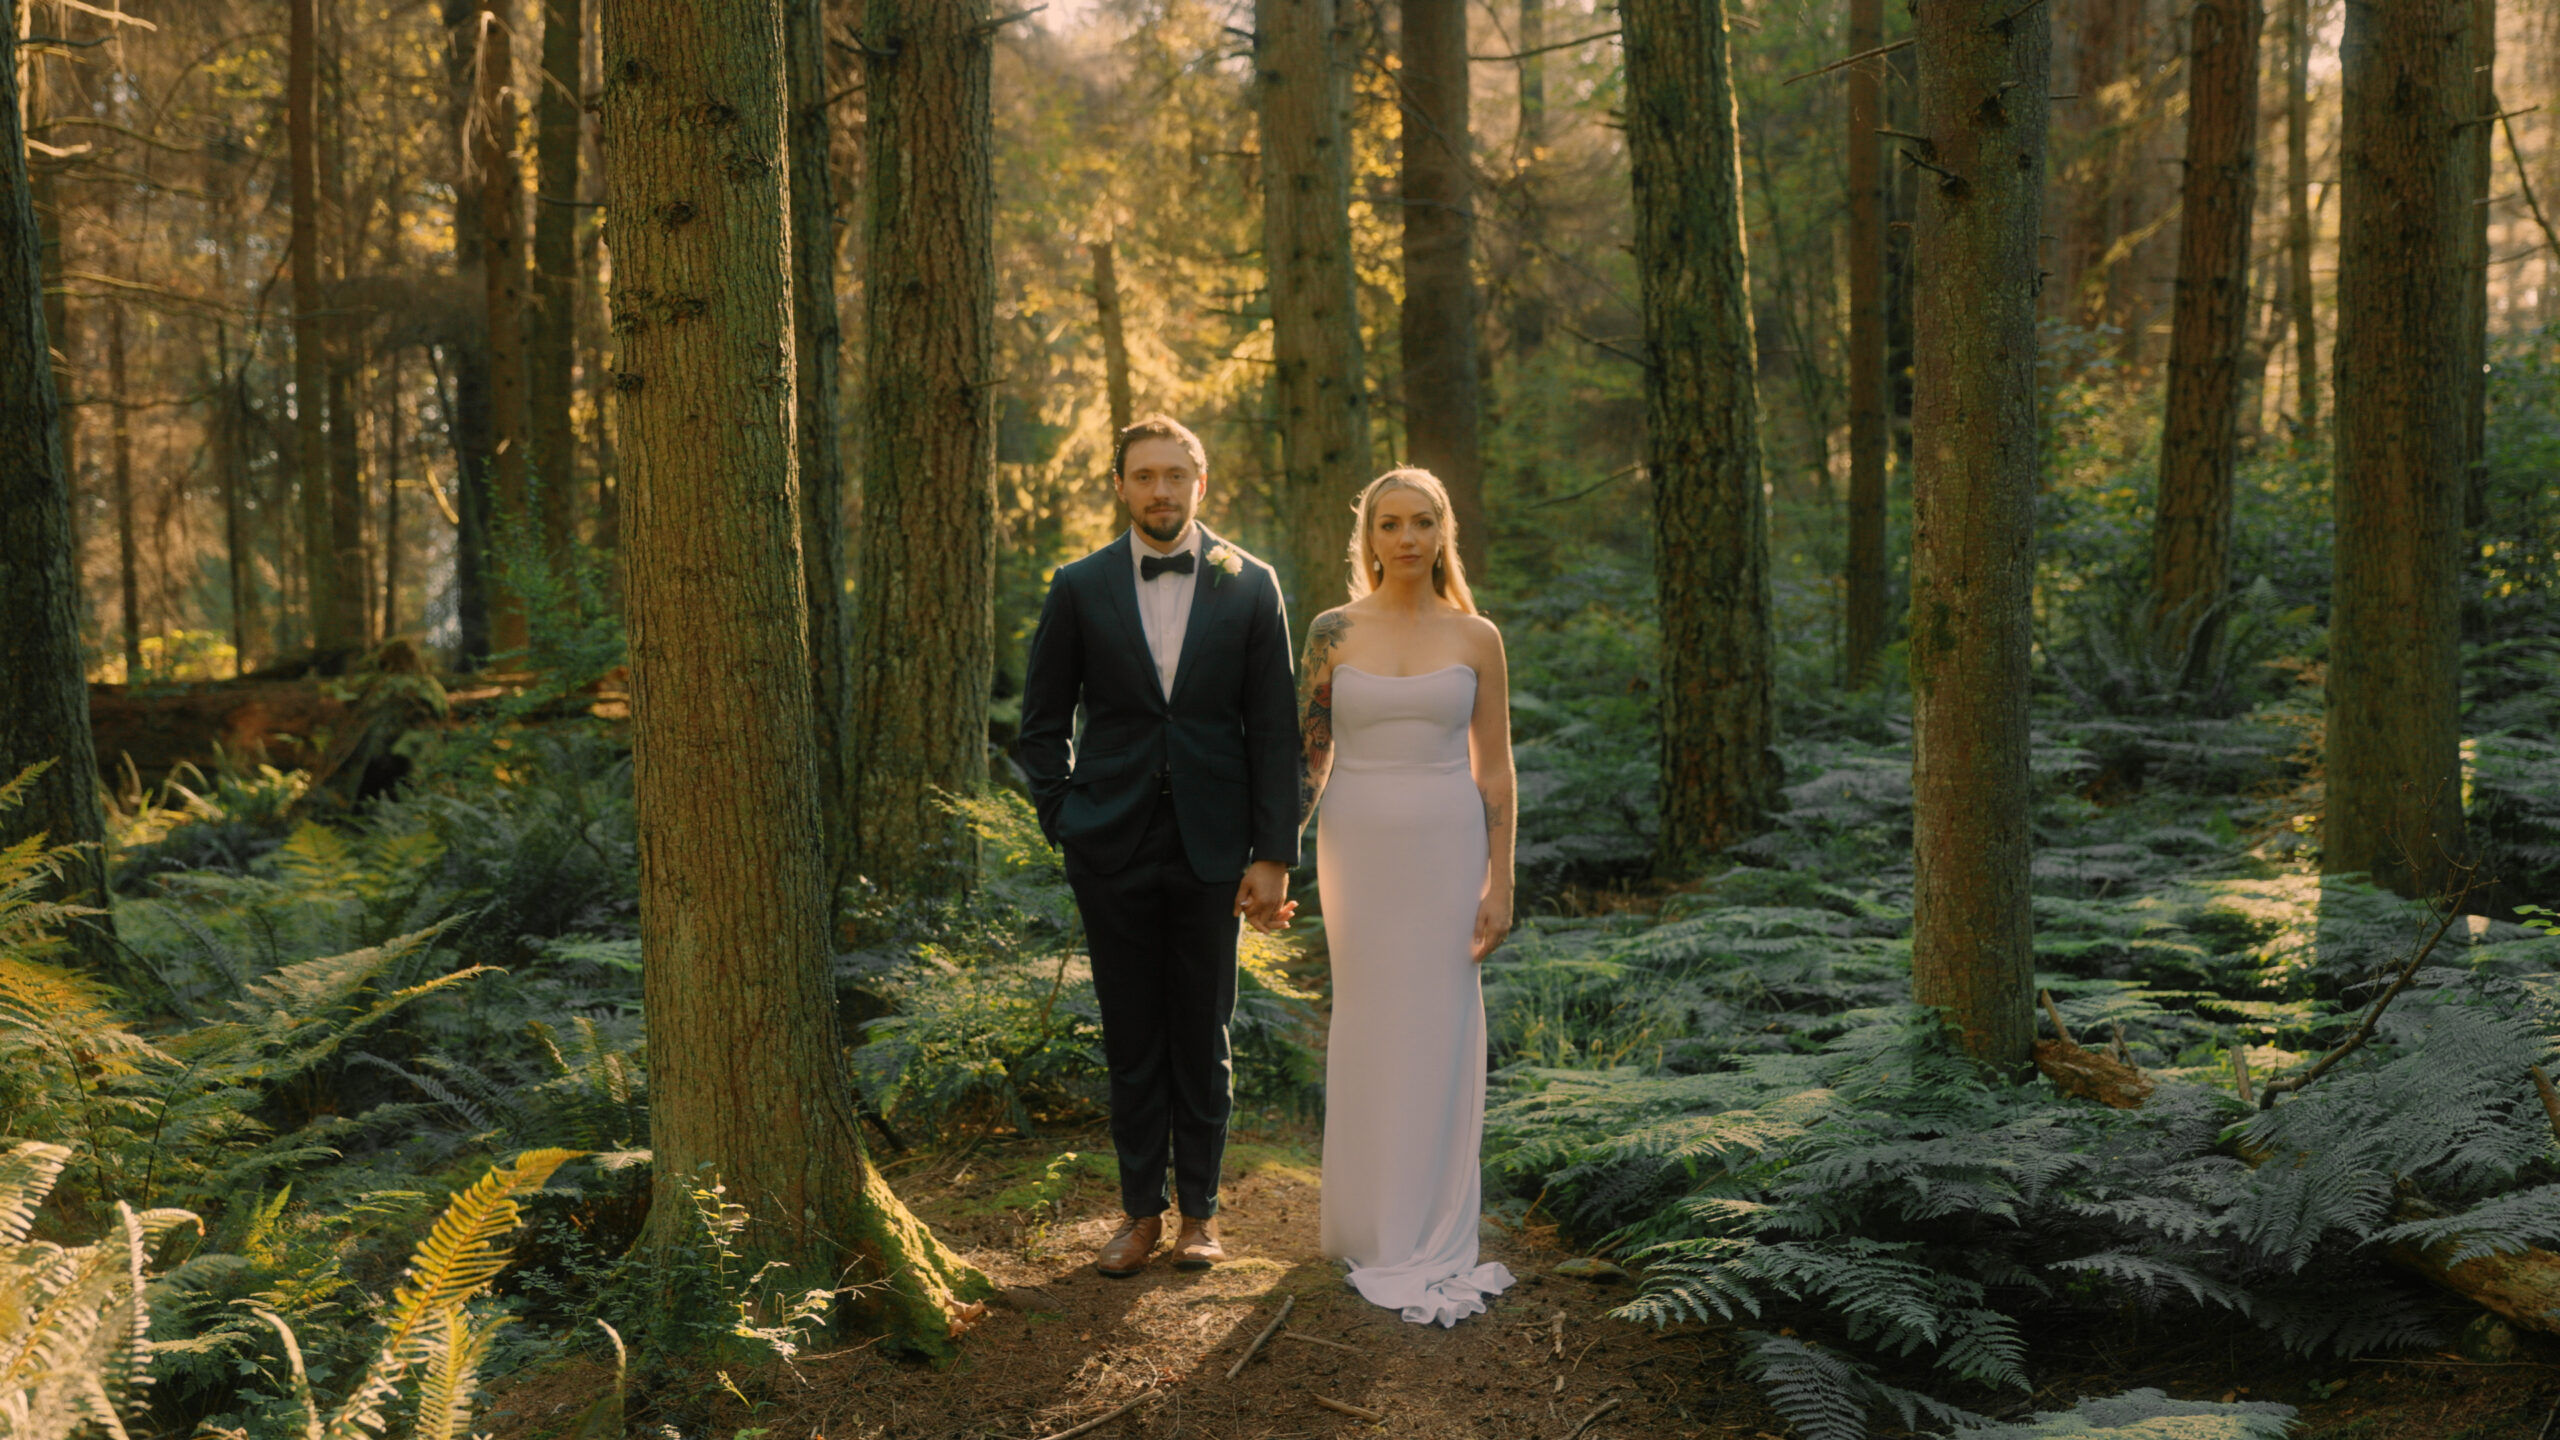 Laura and Xaiver stand side by side in the forest in Stanley Park